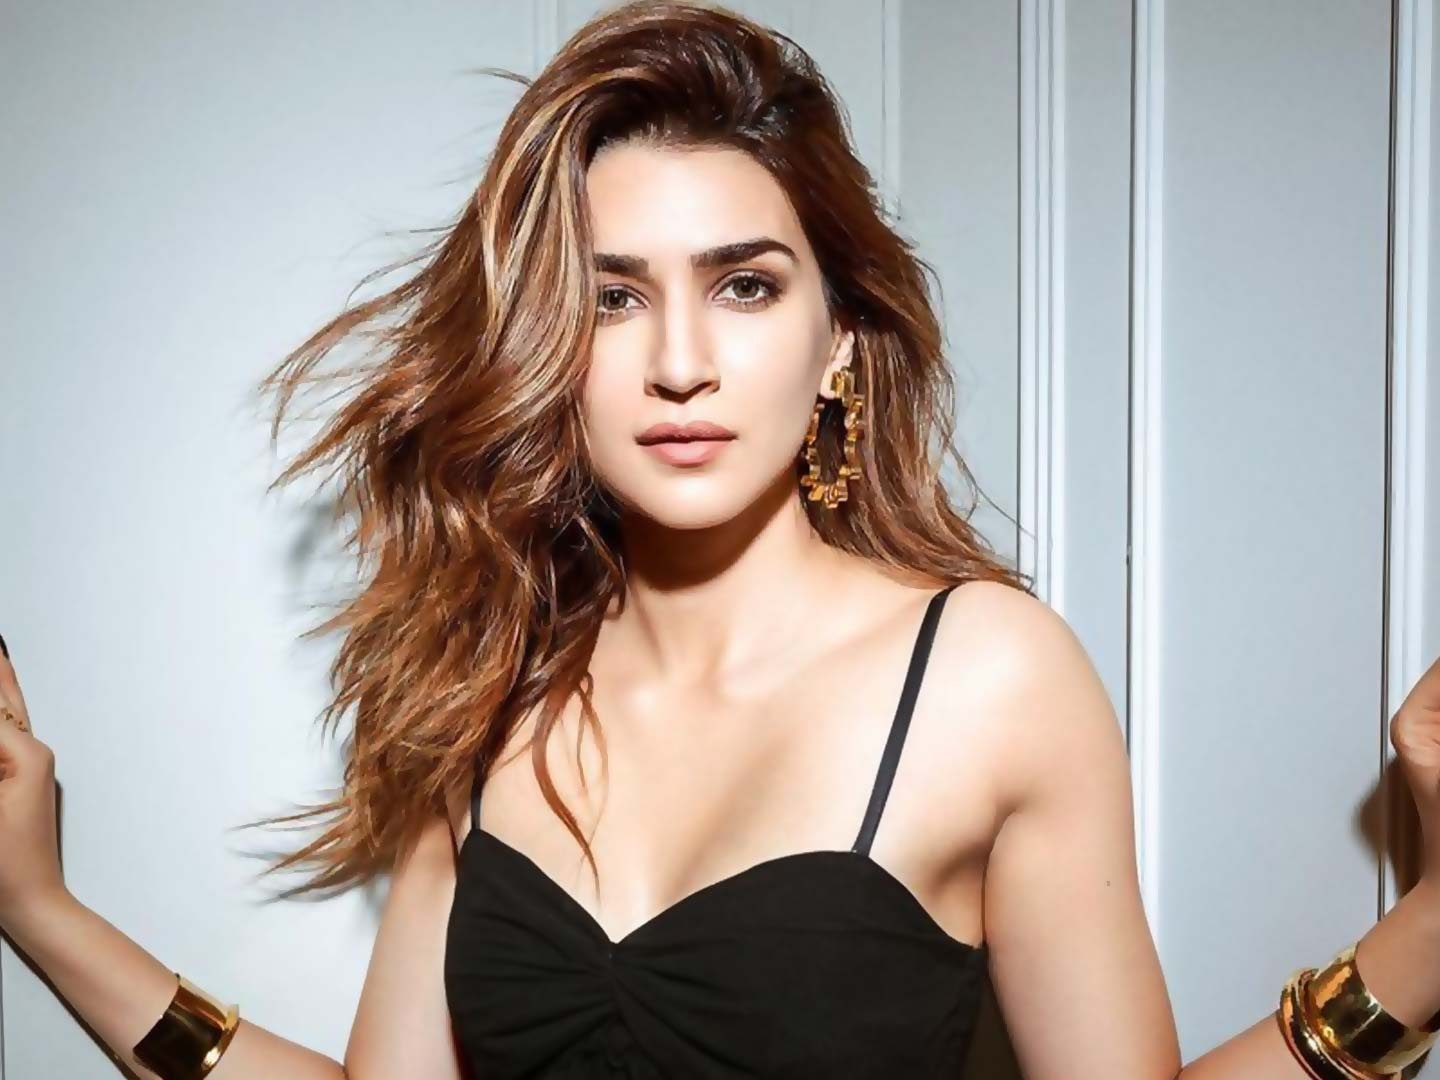 Movies rejected by Kriti Sanon